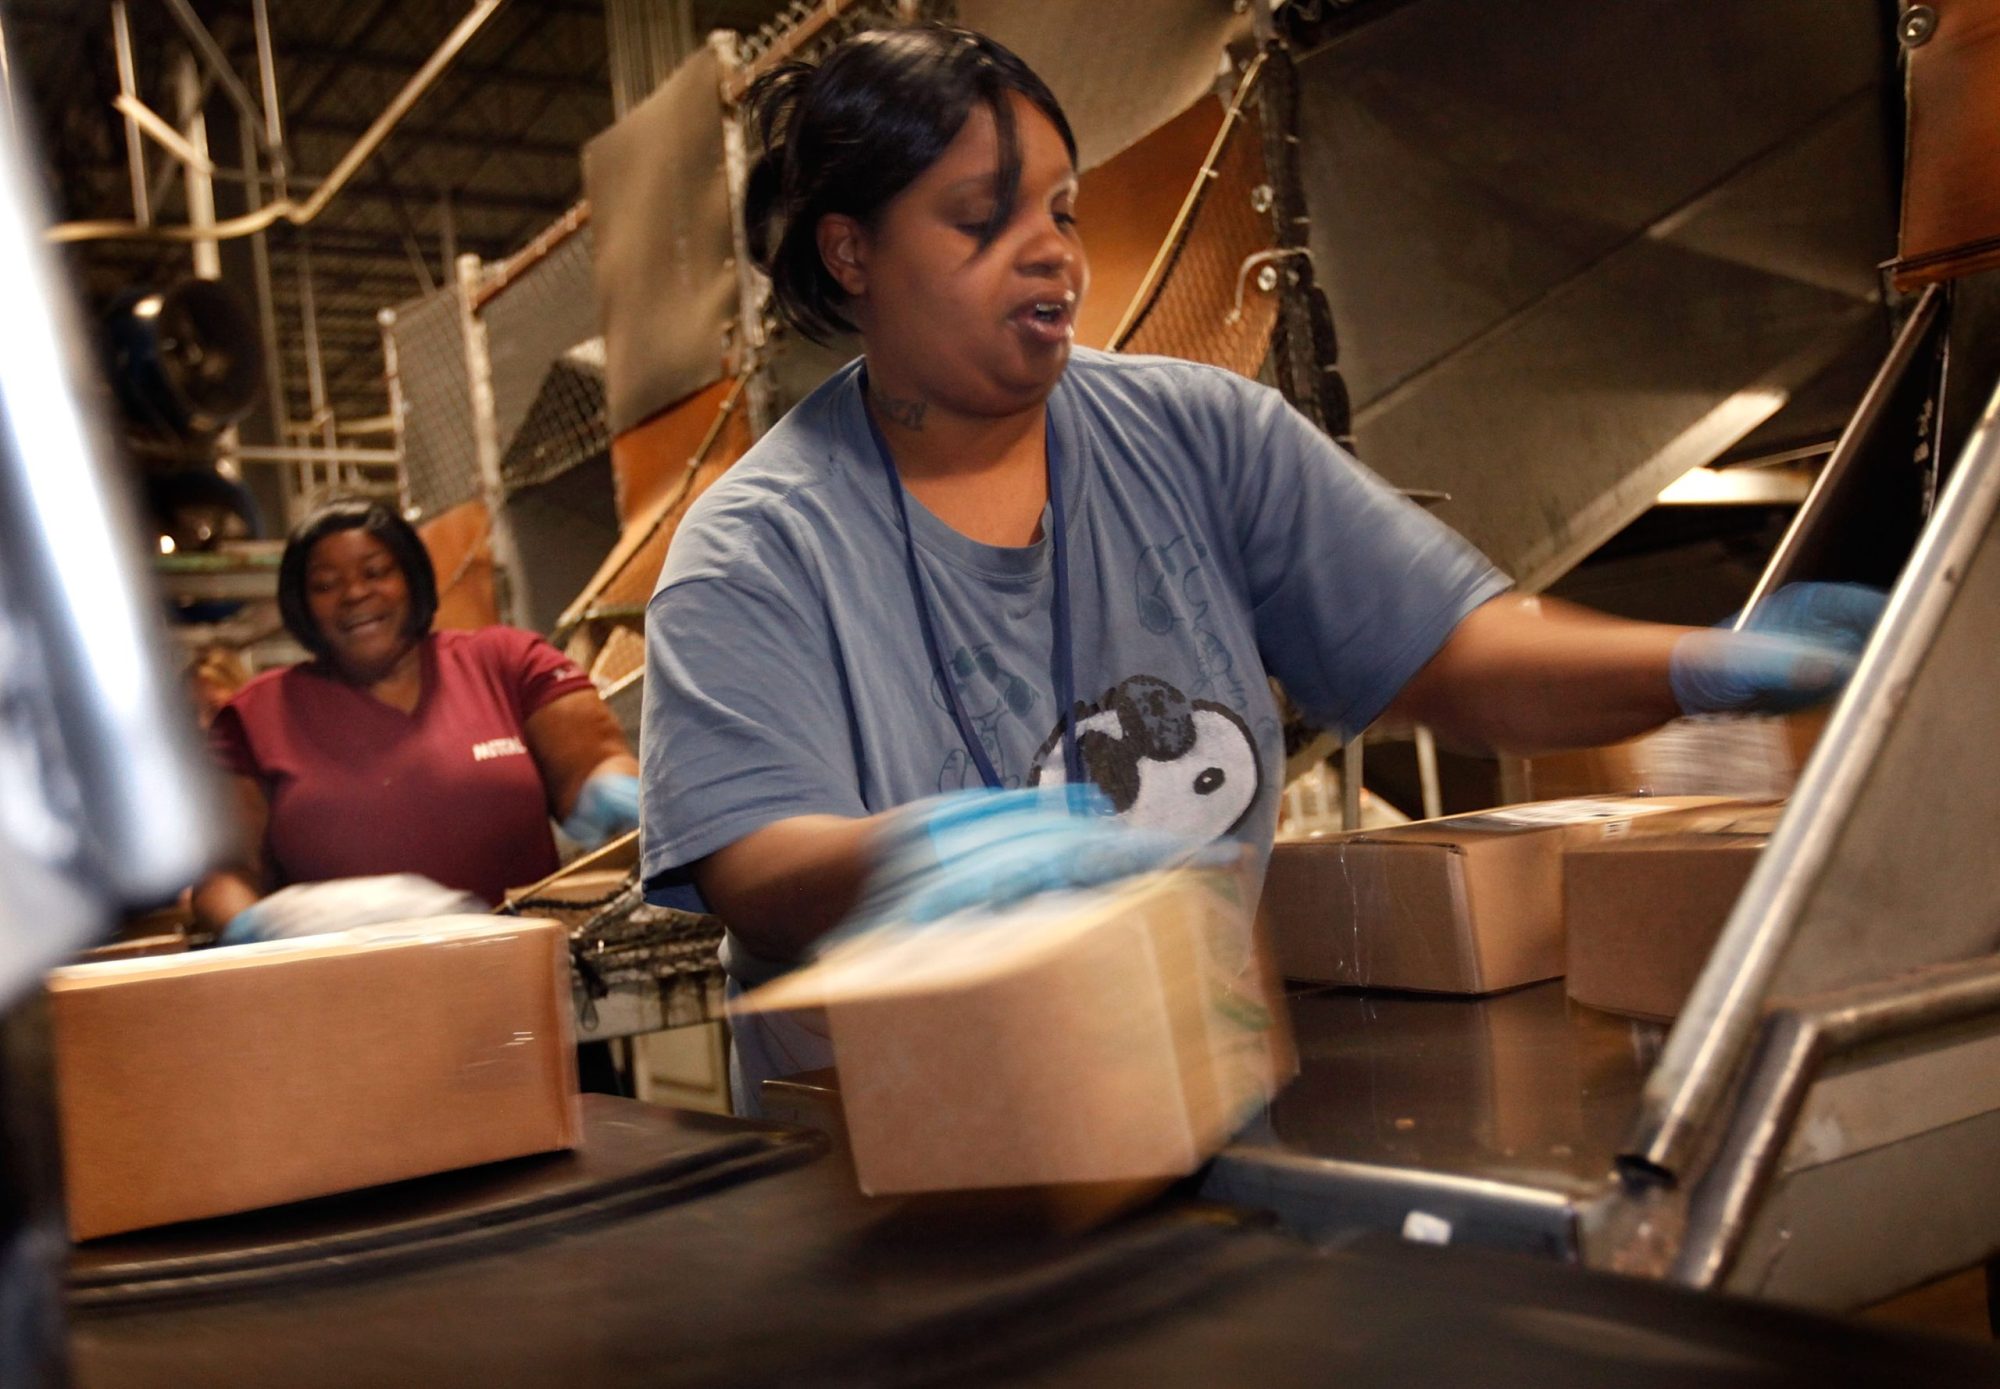 Two Black women stand at a conveyer belt where packages of various sizes are coming down a series of chutes and tubes. The woman in the foreground is wearing a blue shirt, and her arms are somewhat blurred from the speed of her sorting the packages. Her mouth is open mid-speech. In the background, her coworker laughs, apparently responding to something she has heard.